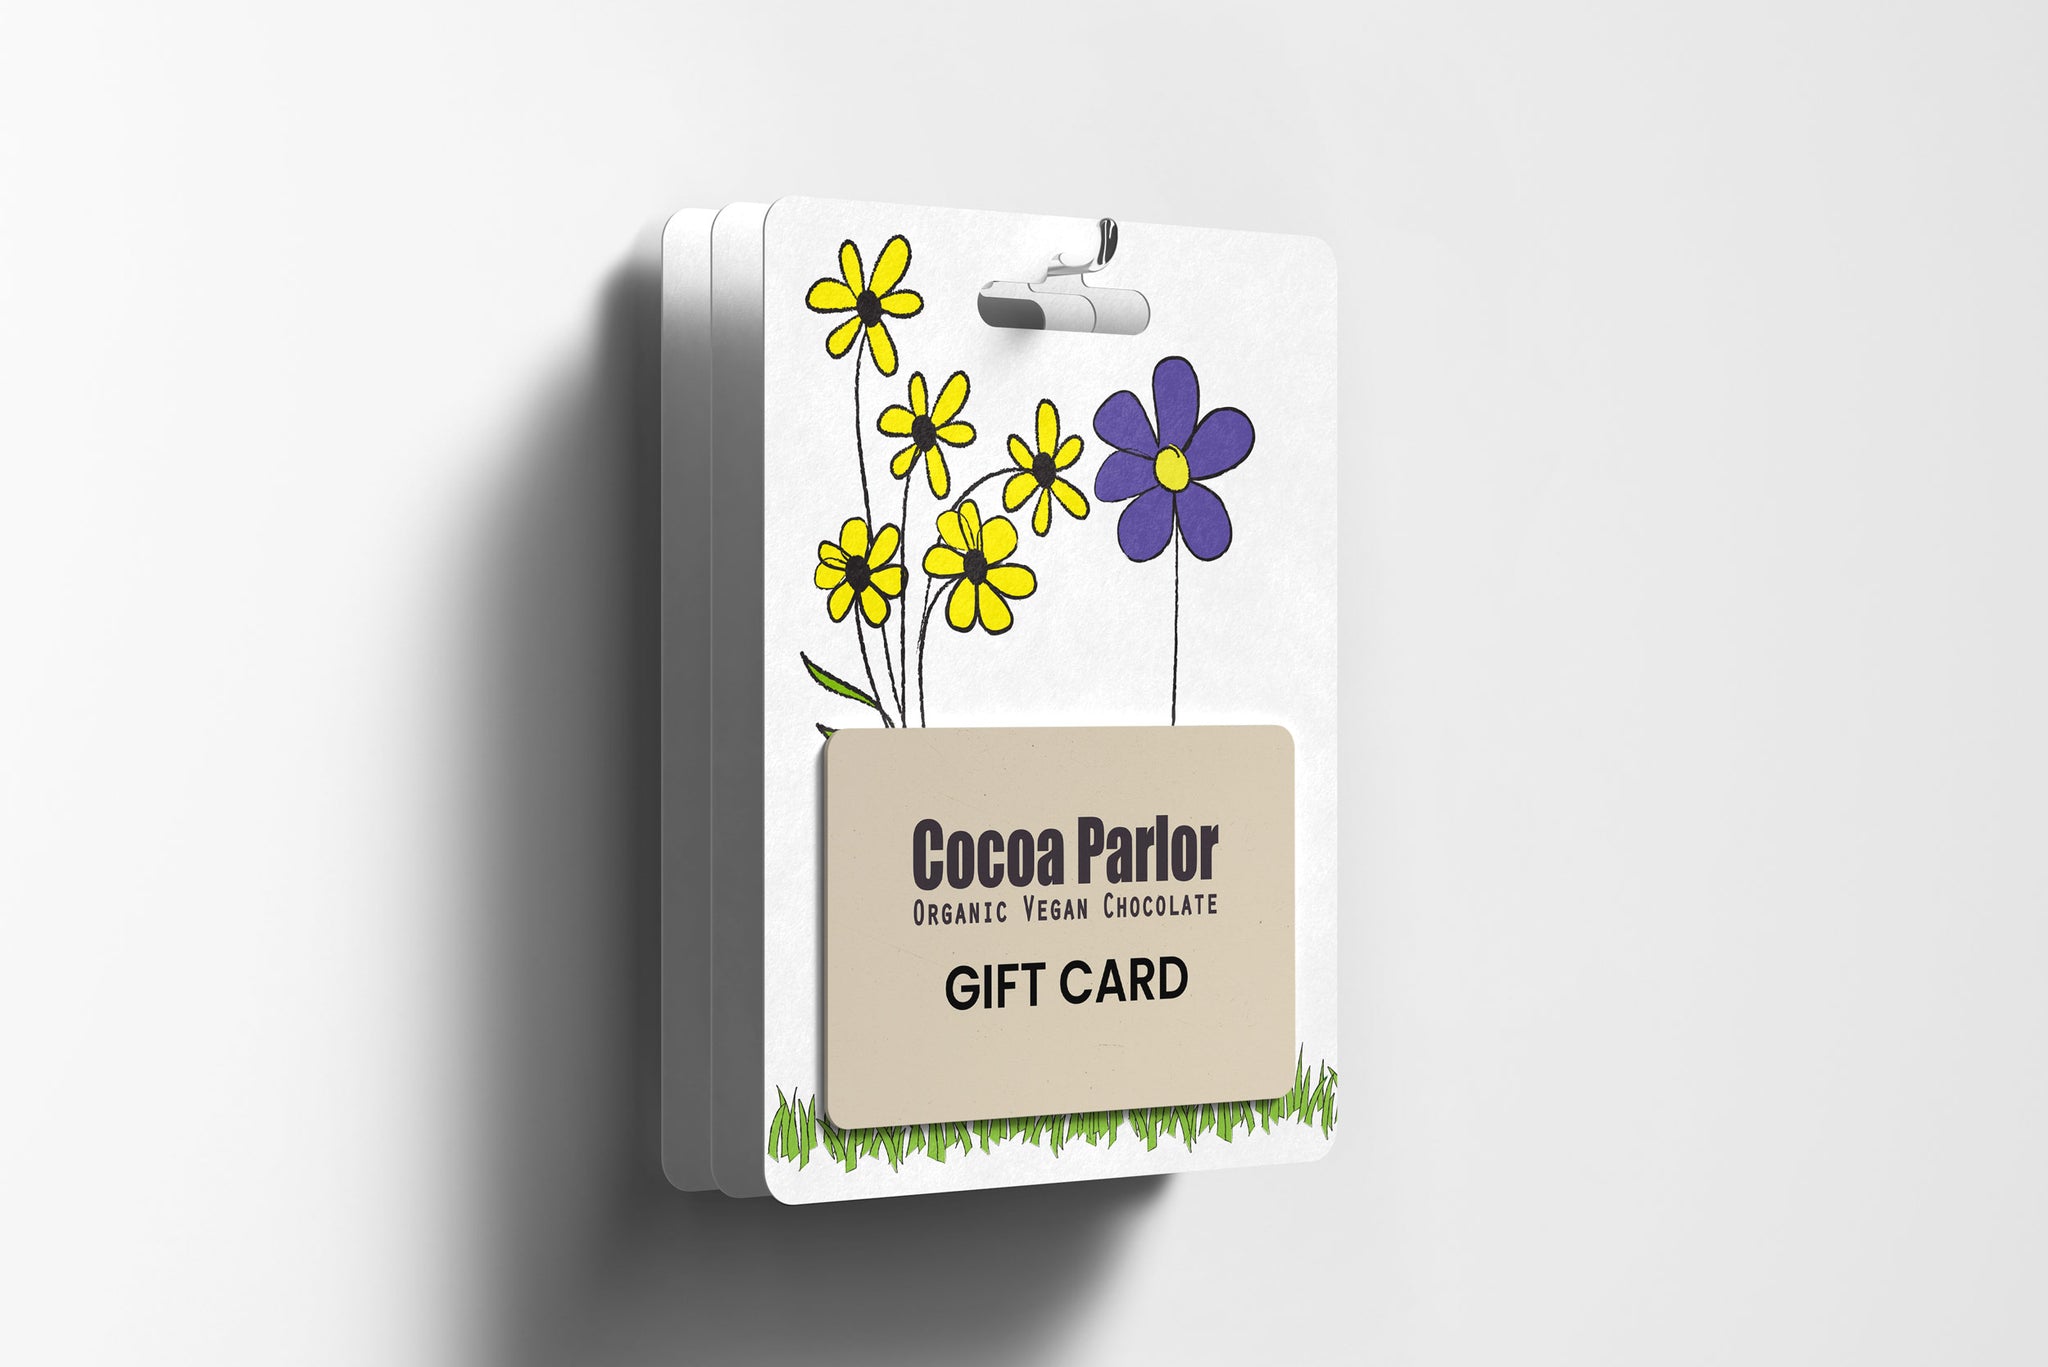 Cocoa Parlor Gift Card